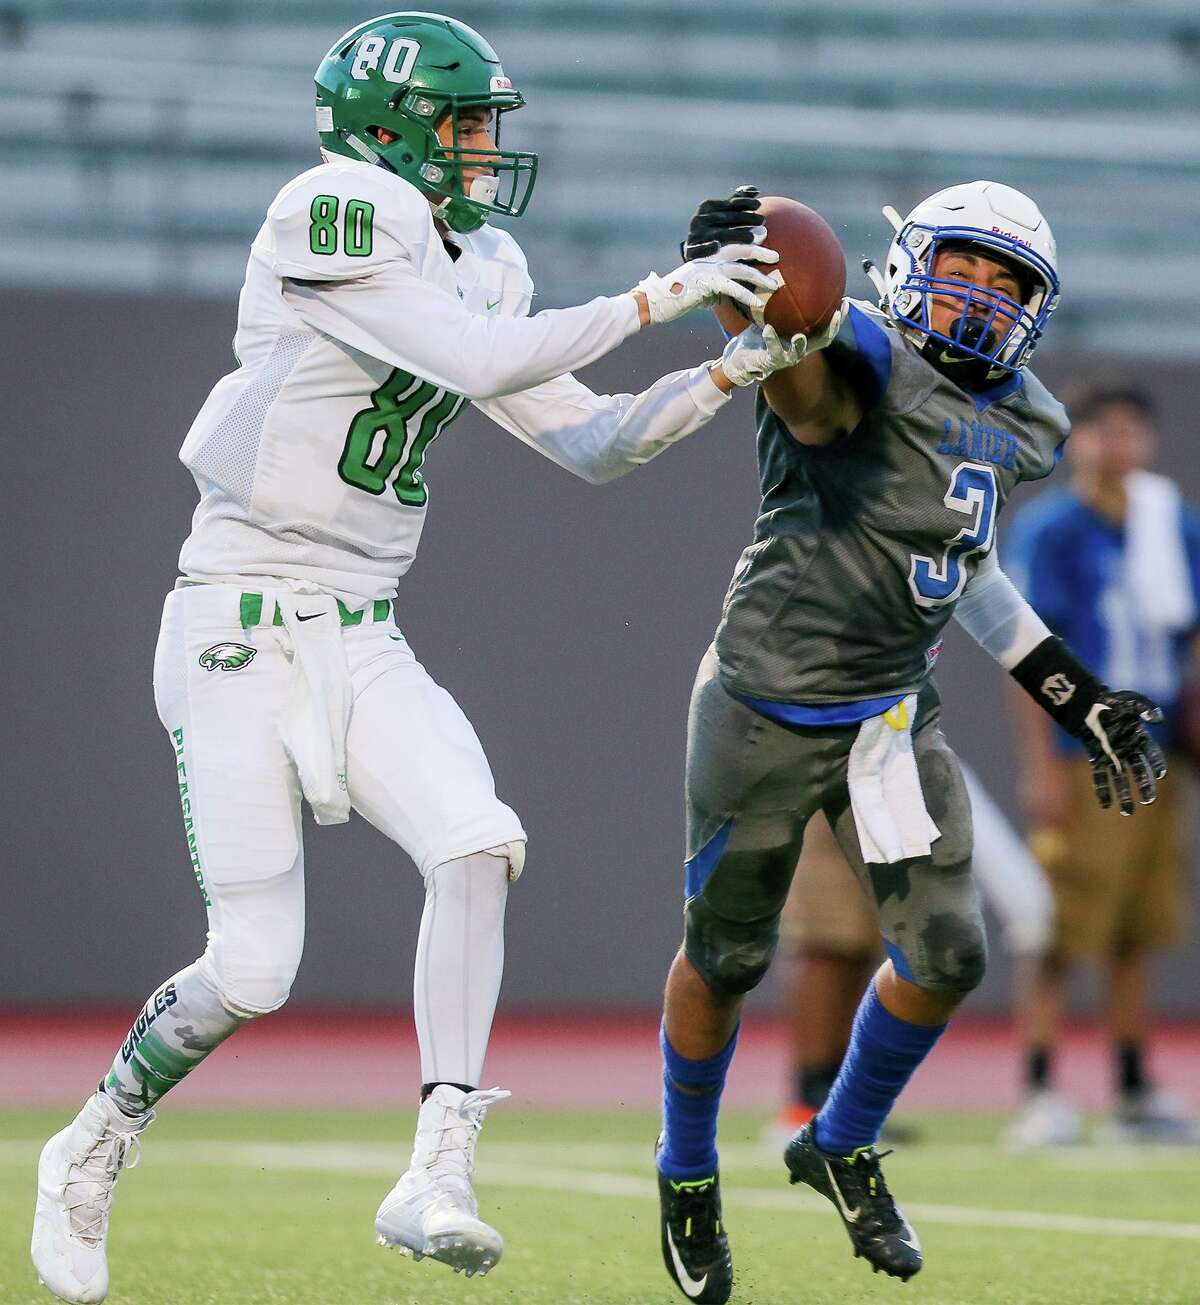 Lanier's Savian Perez (right) defends a pass intended for Pleasanton's Dalton Hobbs during the first half of their high school football game at Alamo Stadium on Thursday, Sept. 6, 2018.